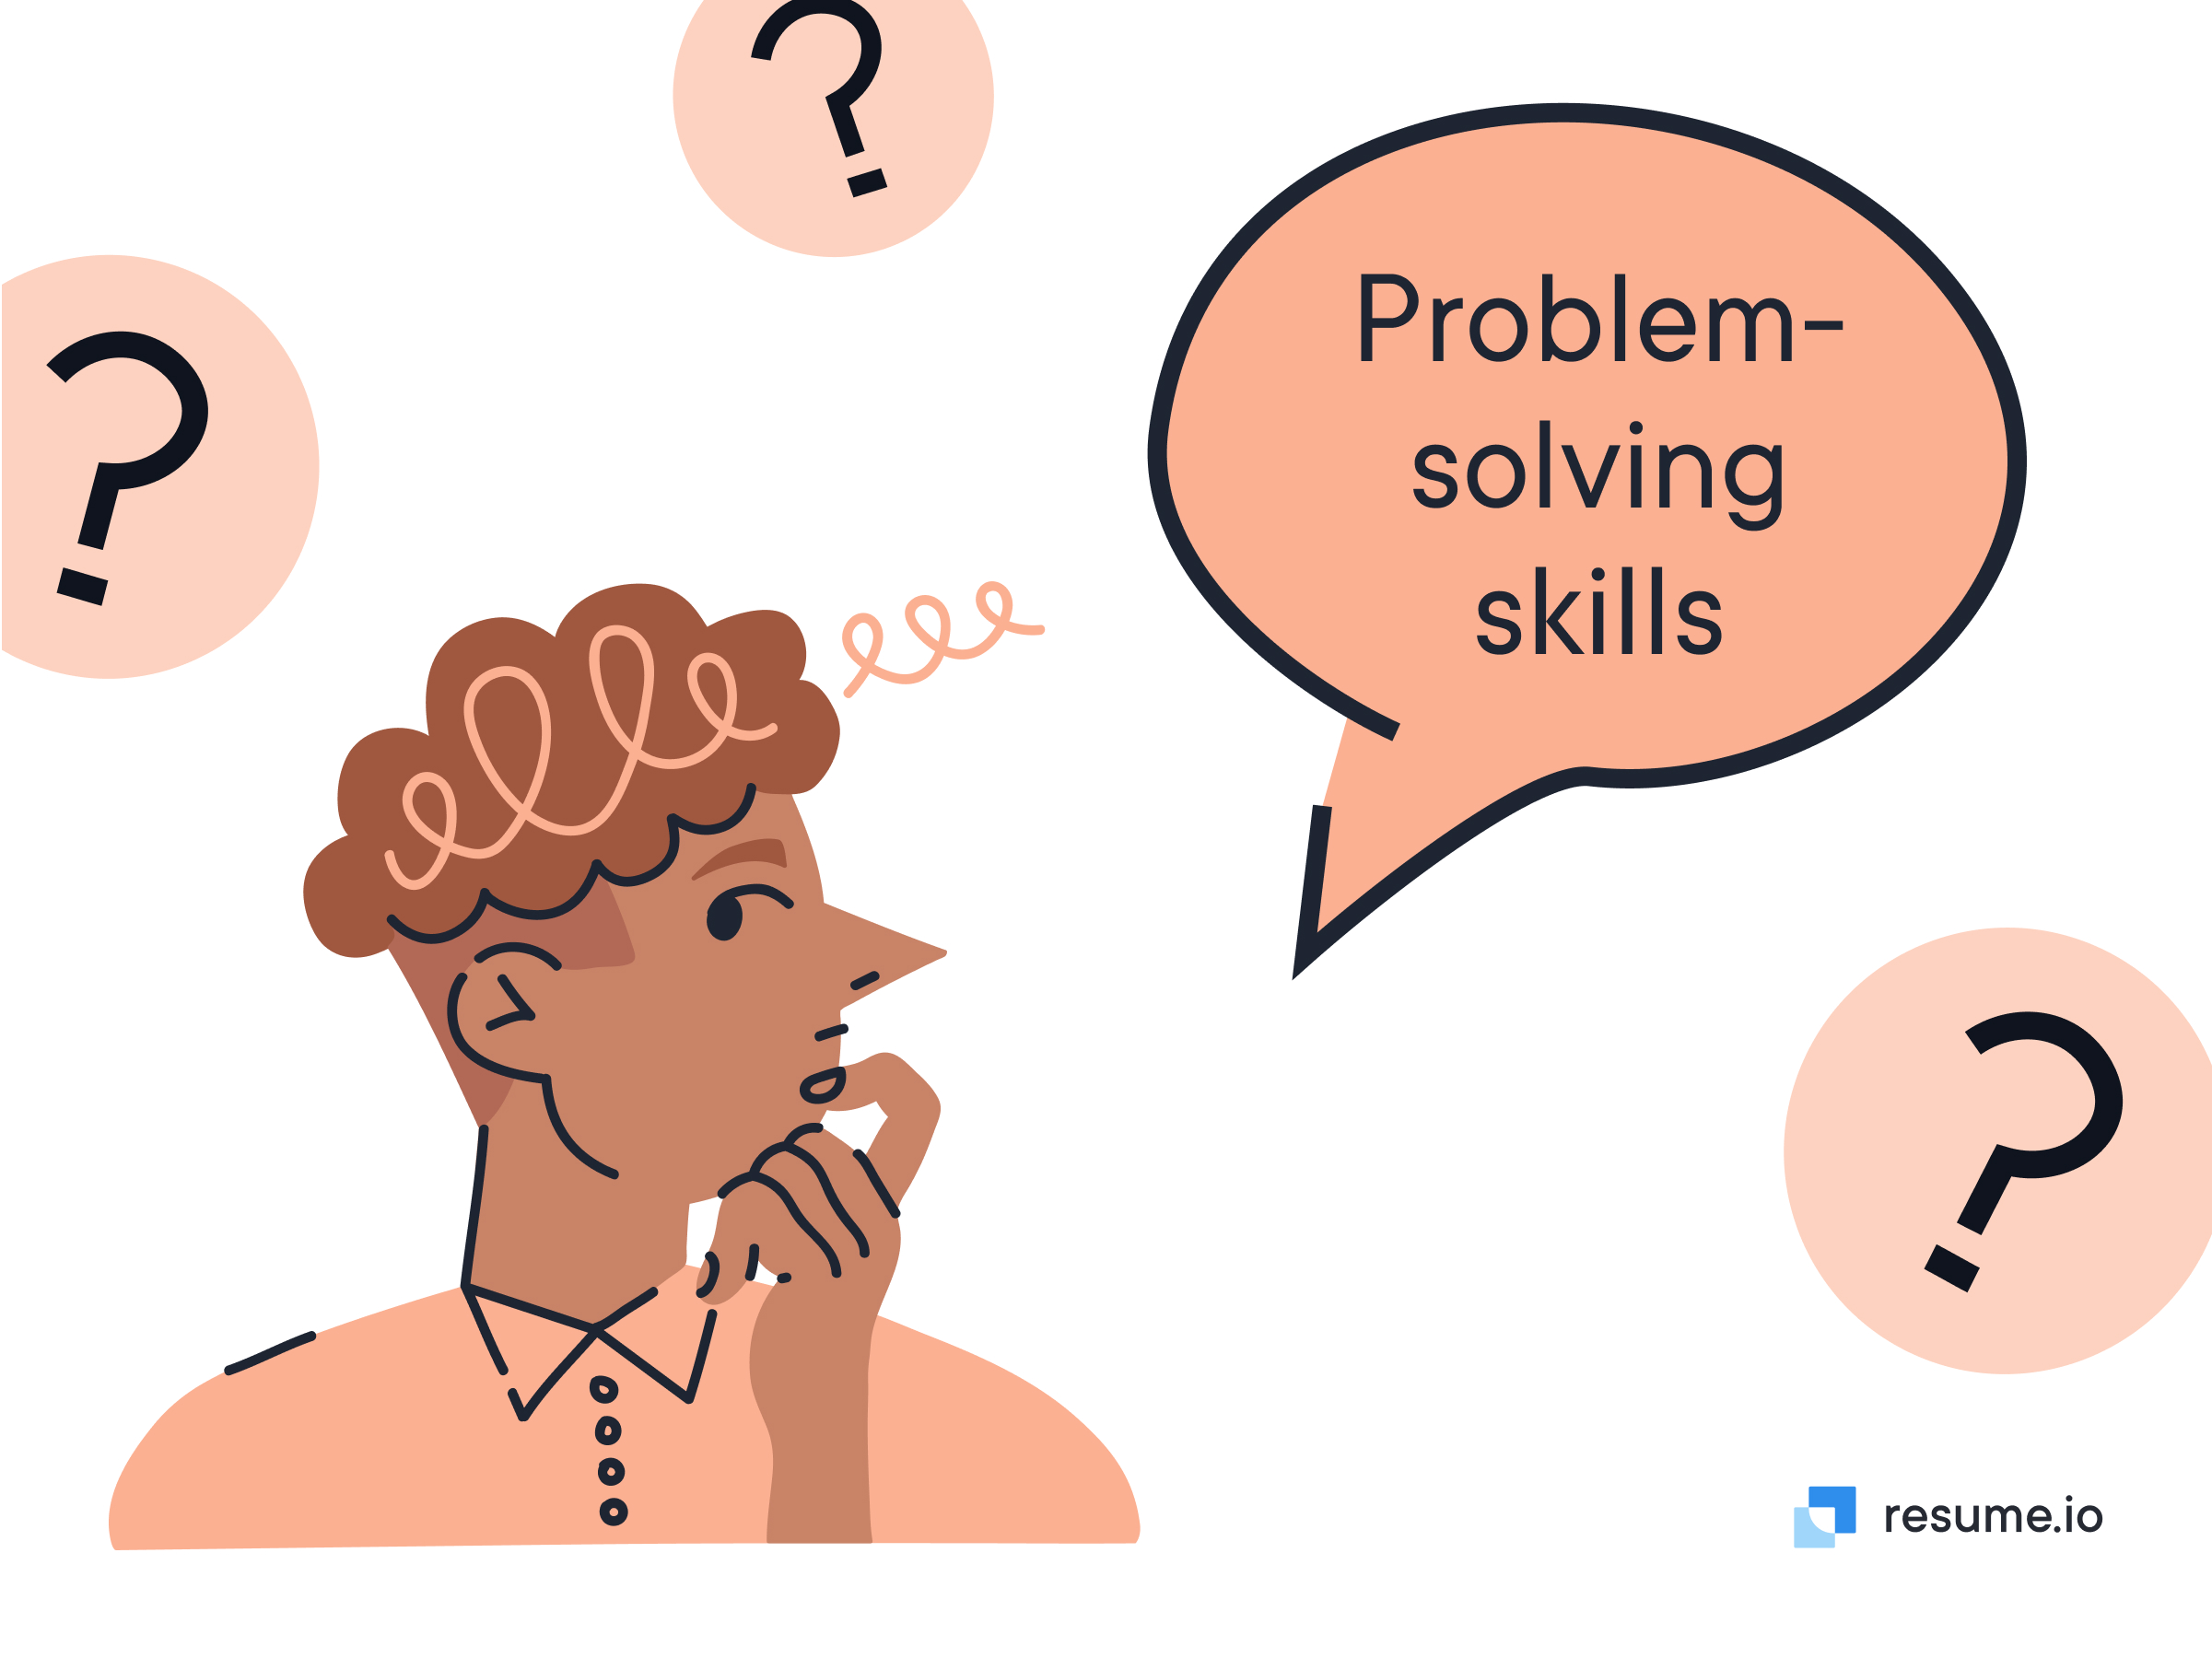 Man thinking about problem-solving skills